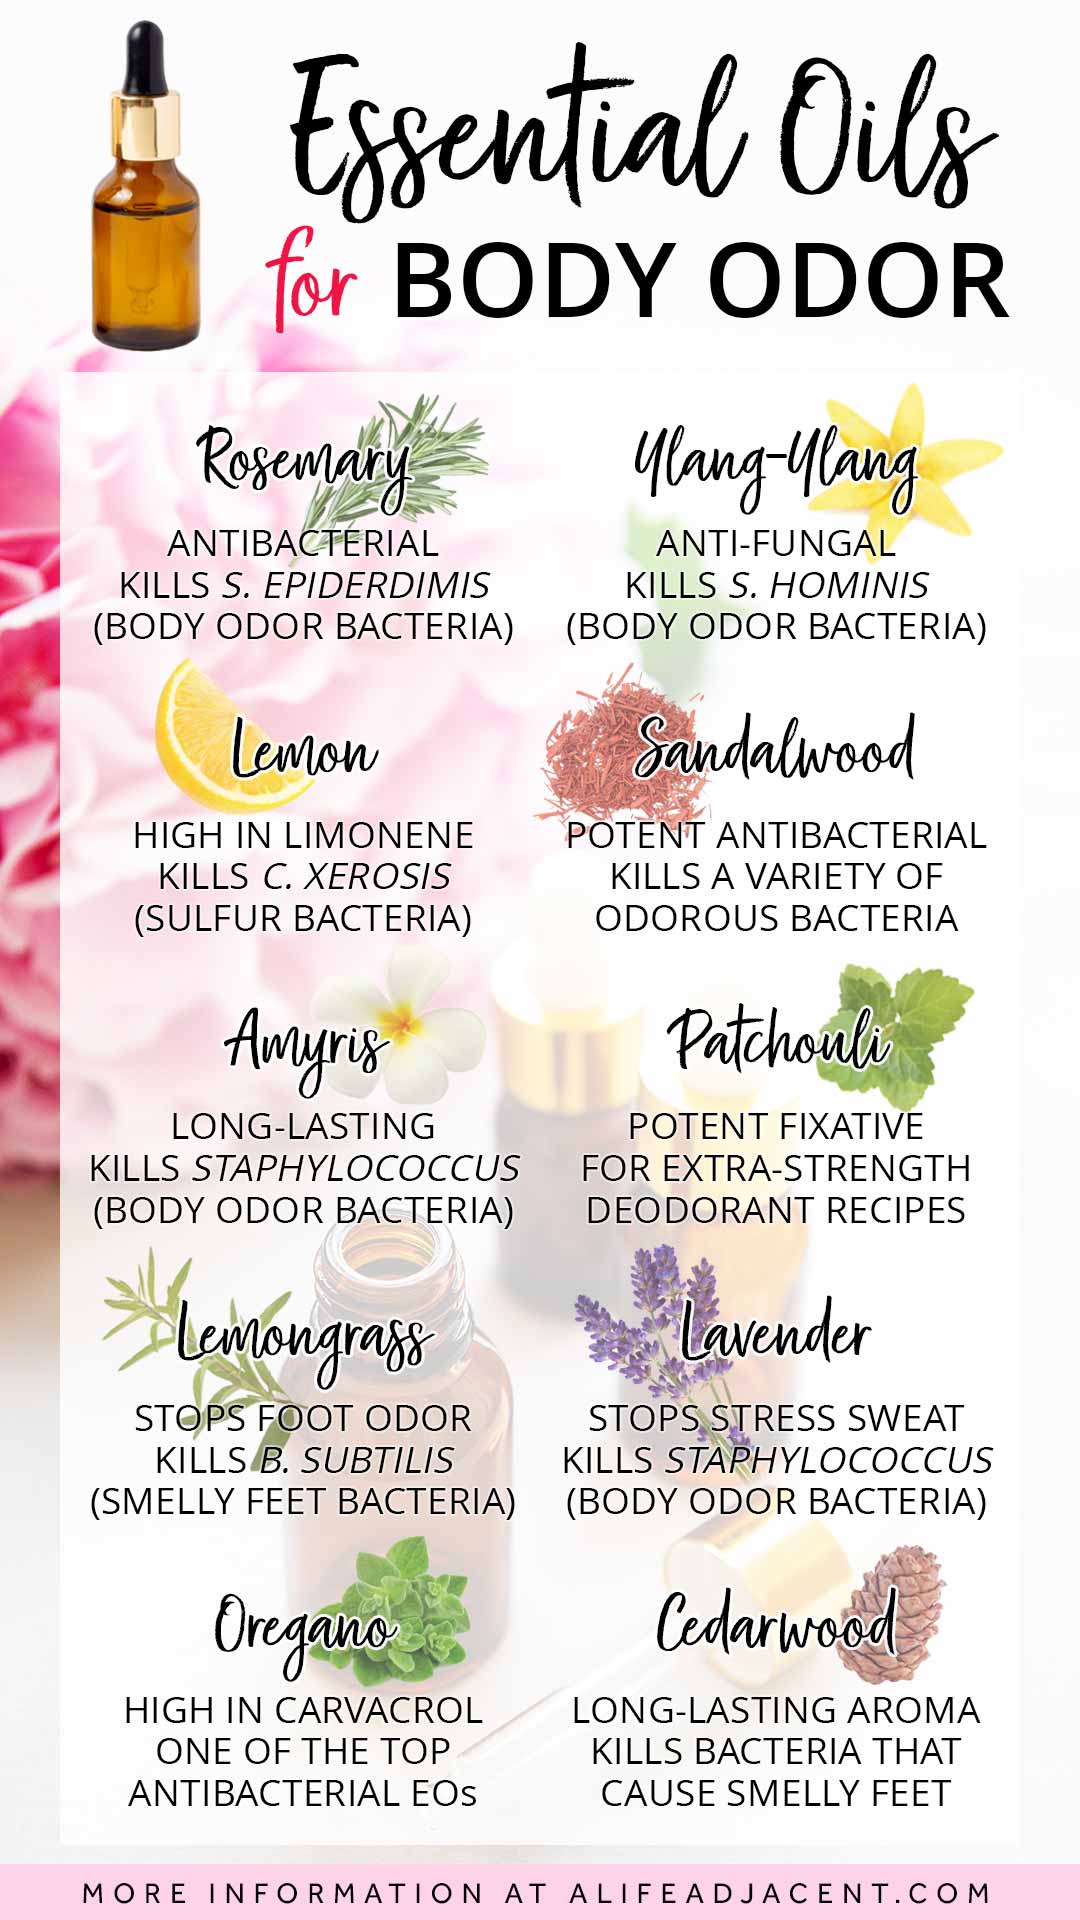 Essential Oil Quality - Essential Oils With B